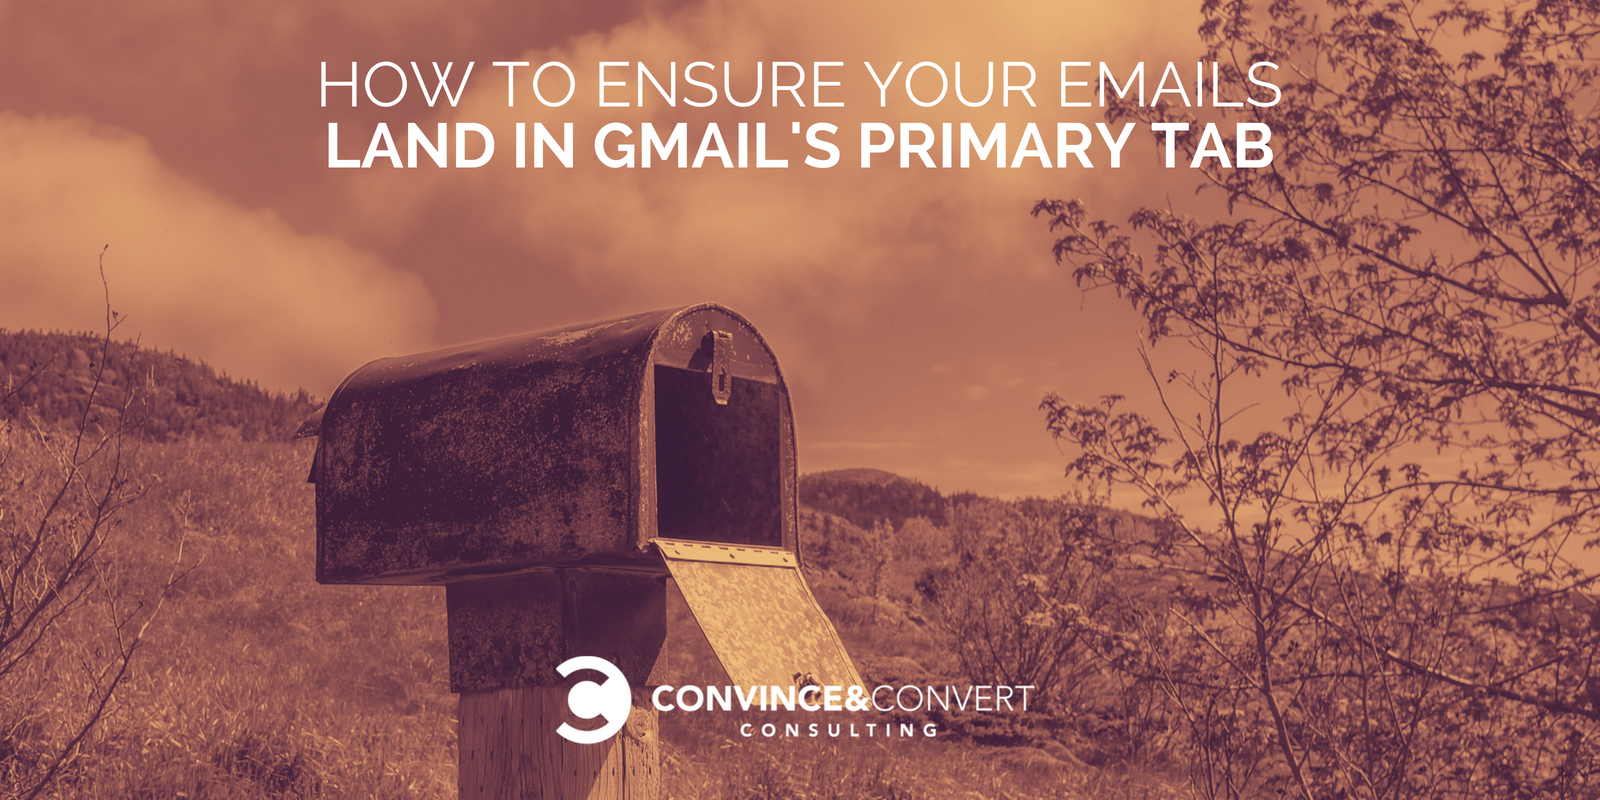 How to Ensure Your Emails Land in Gmail's Primary Tab